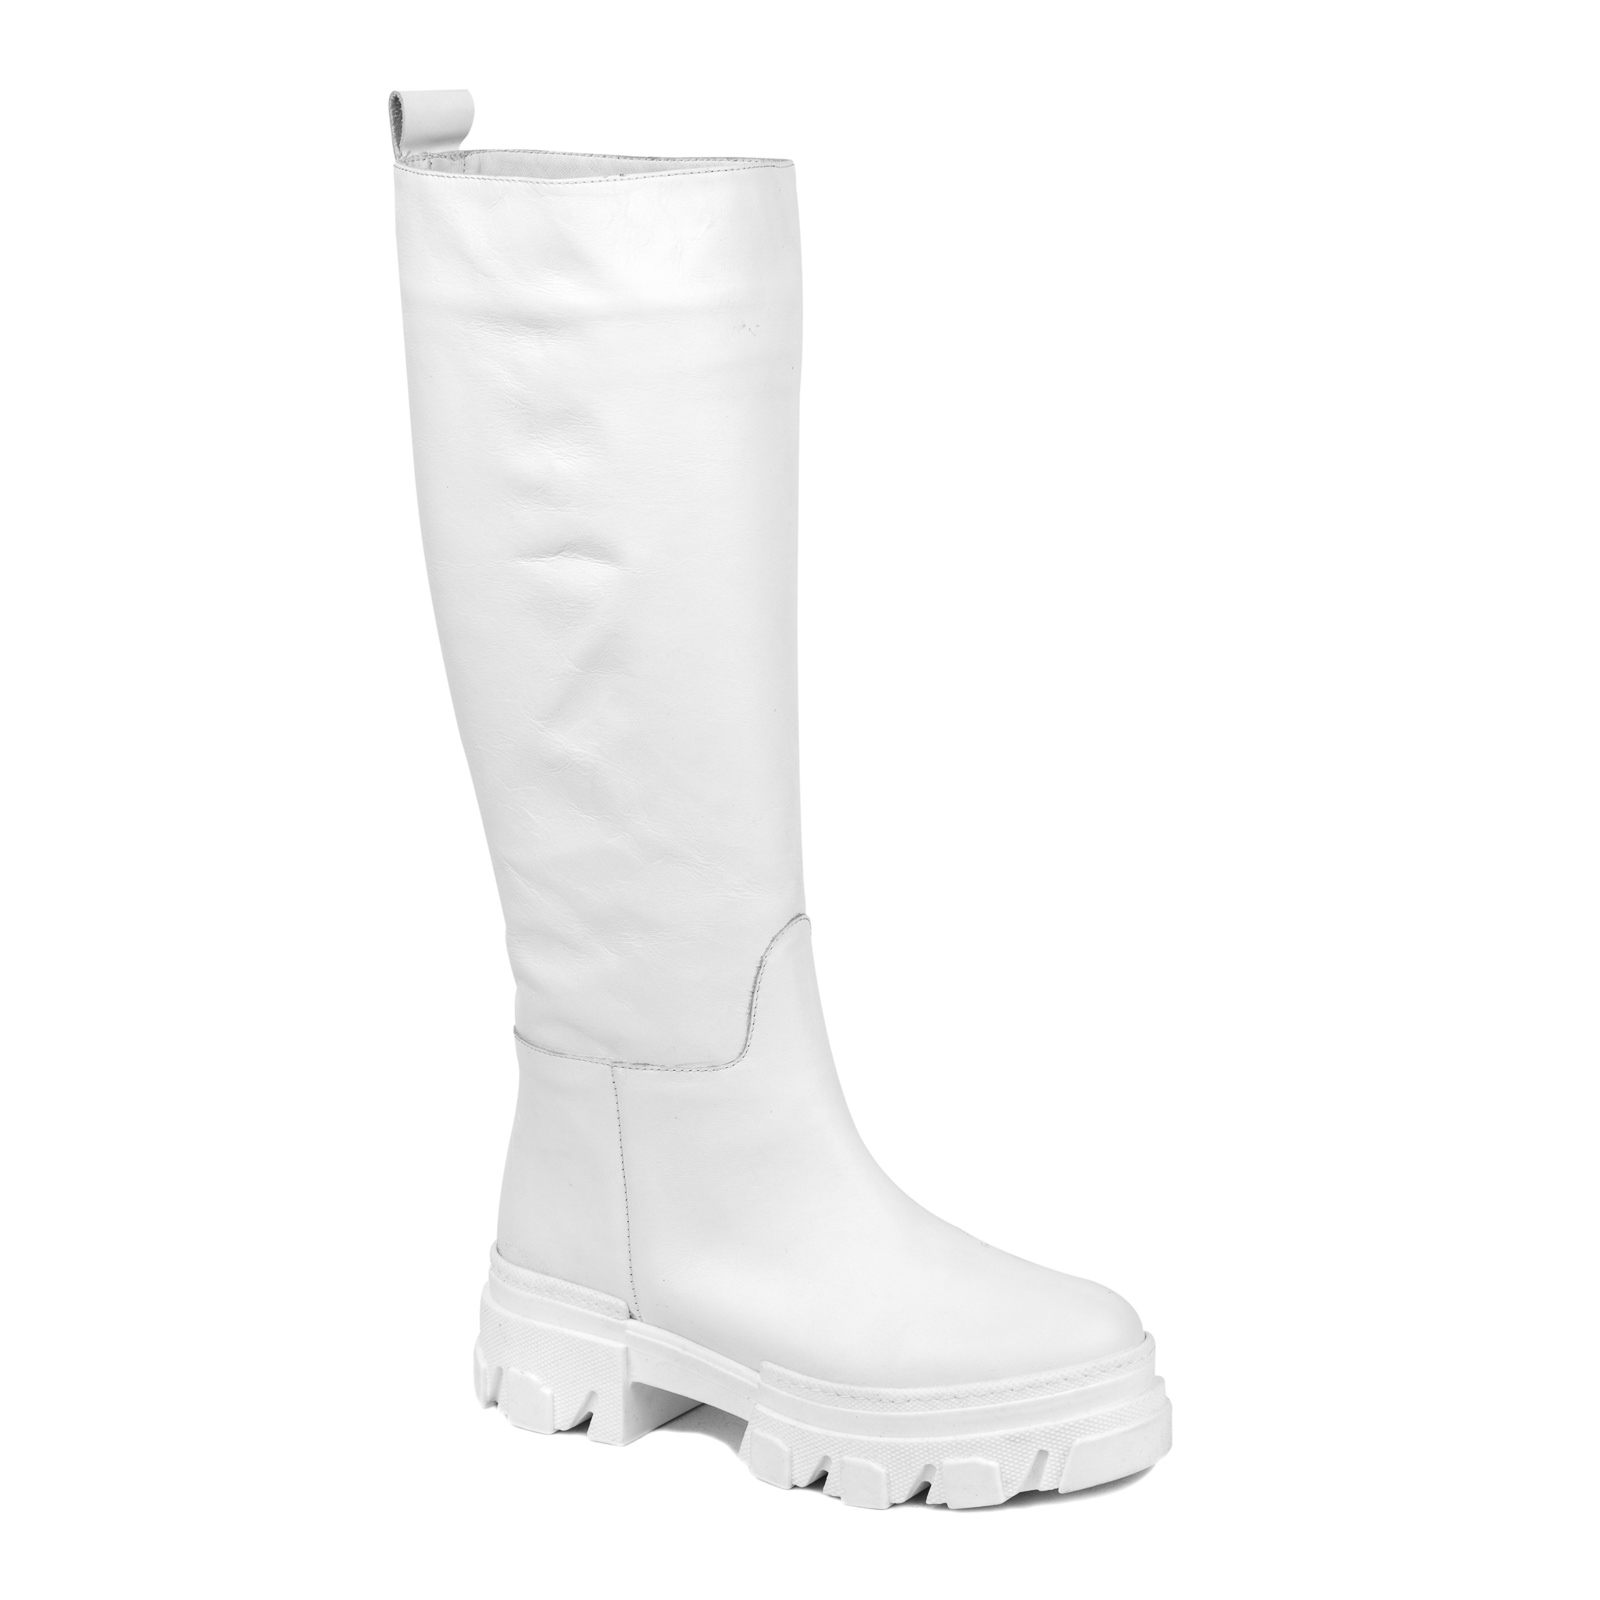 Leather WATERPROOF boots B128 - WHITE